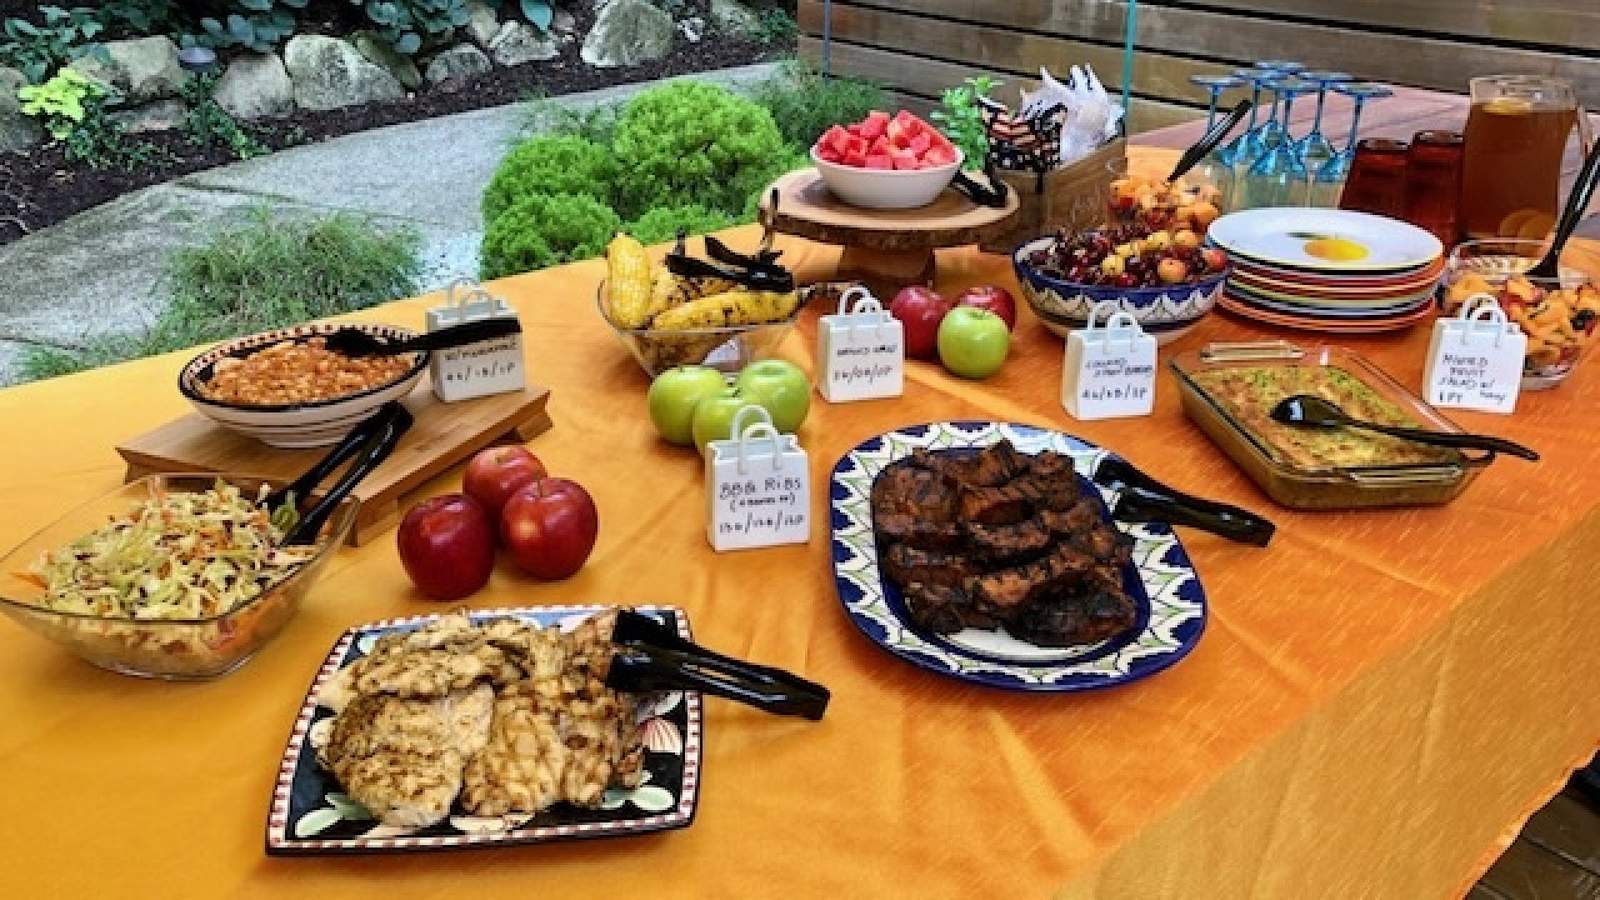 Here are some healthy summer grilling ideas